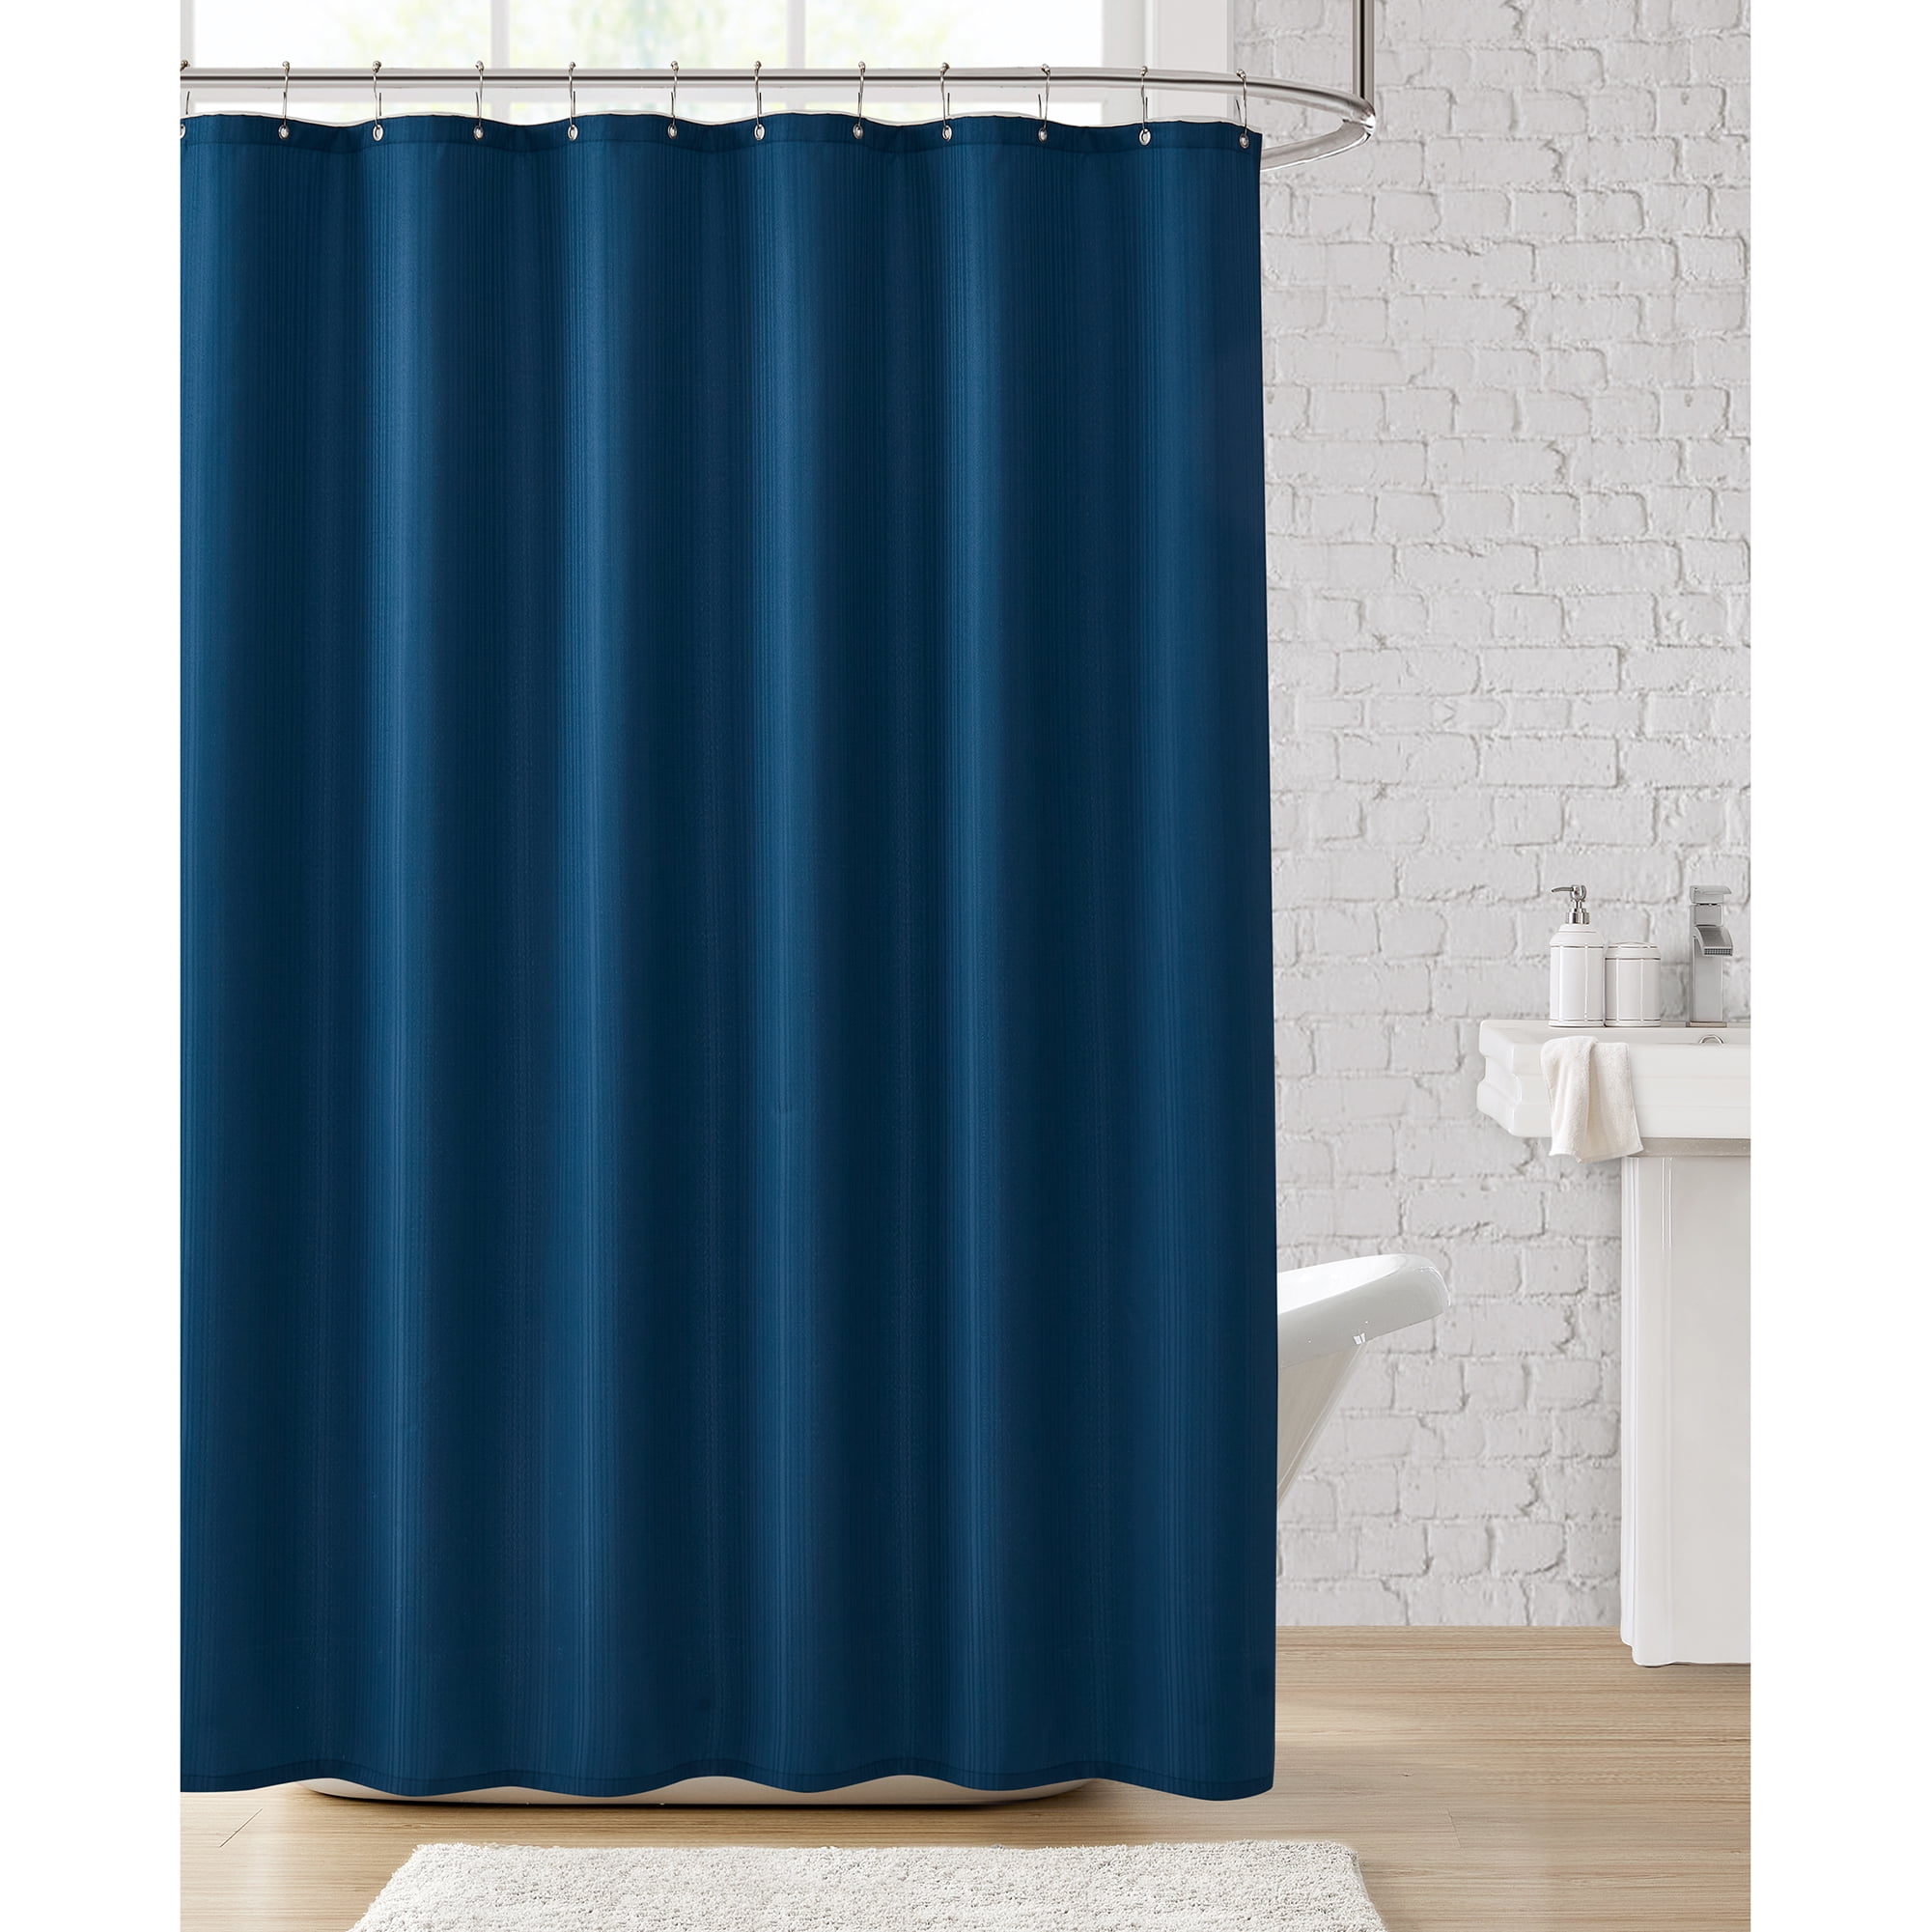 Clorox 100% Polyester Shower Curtain Set with Waterproof PEVA Liner and ...